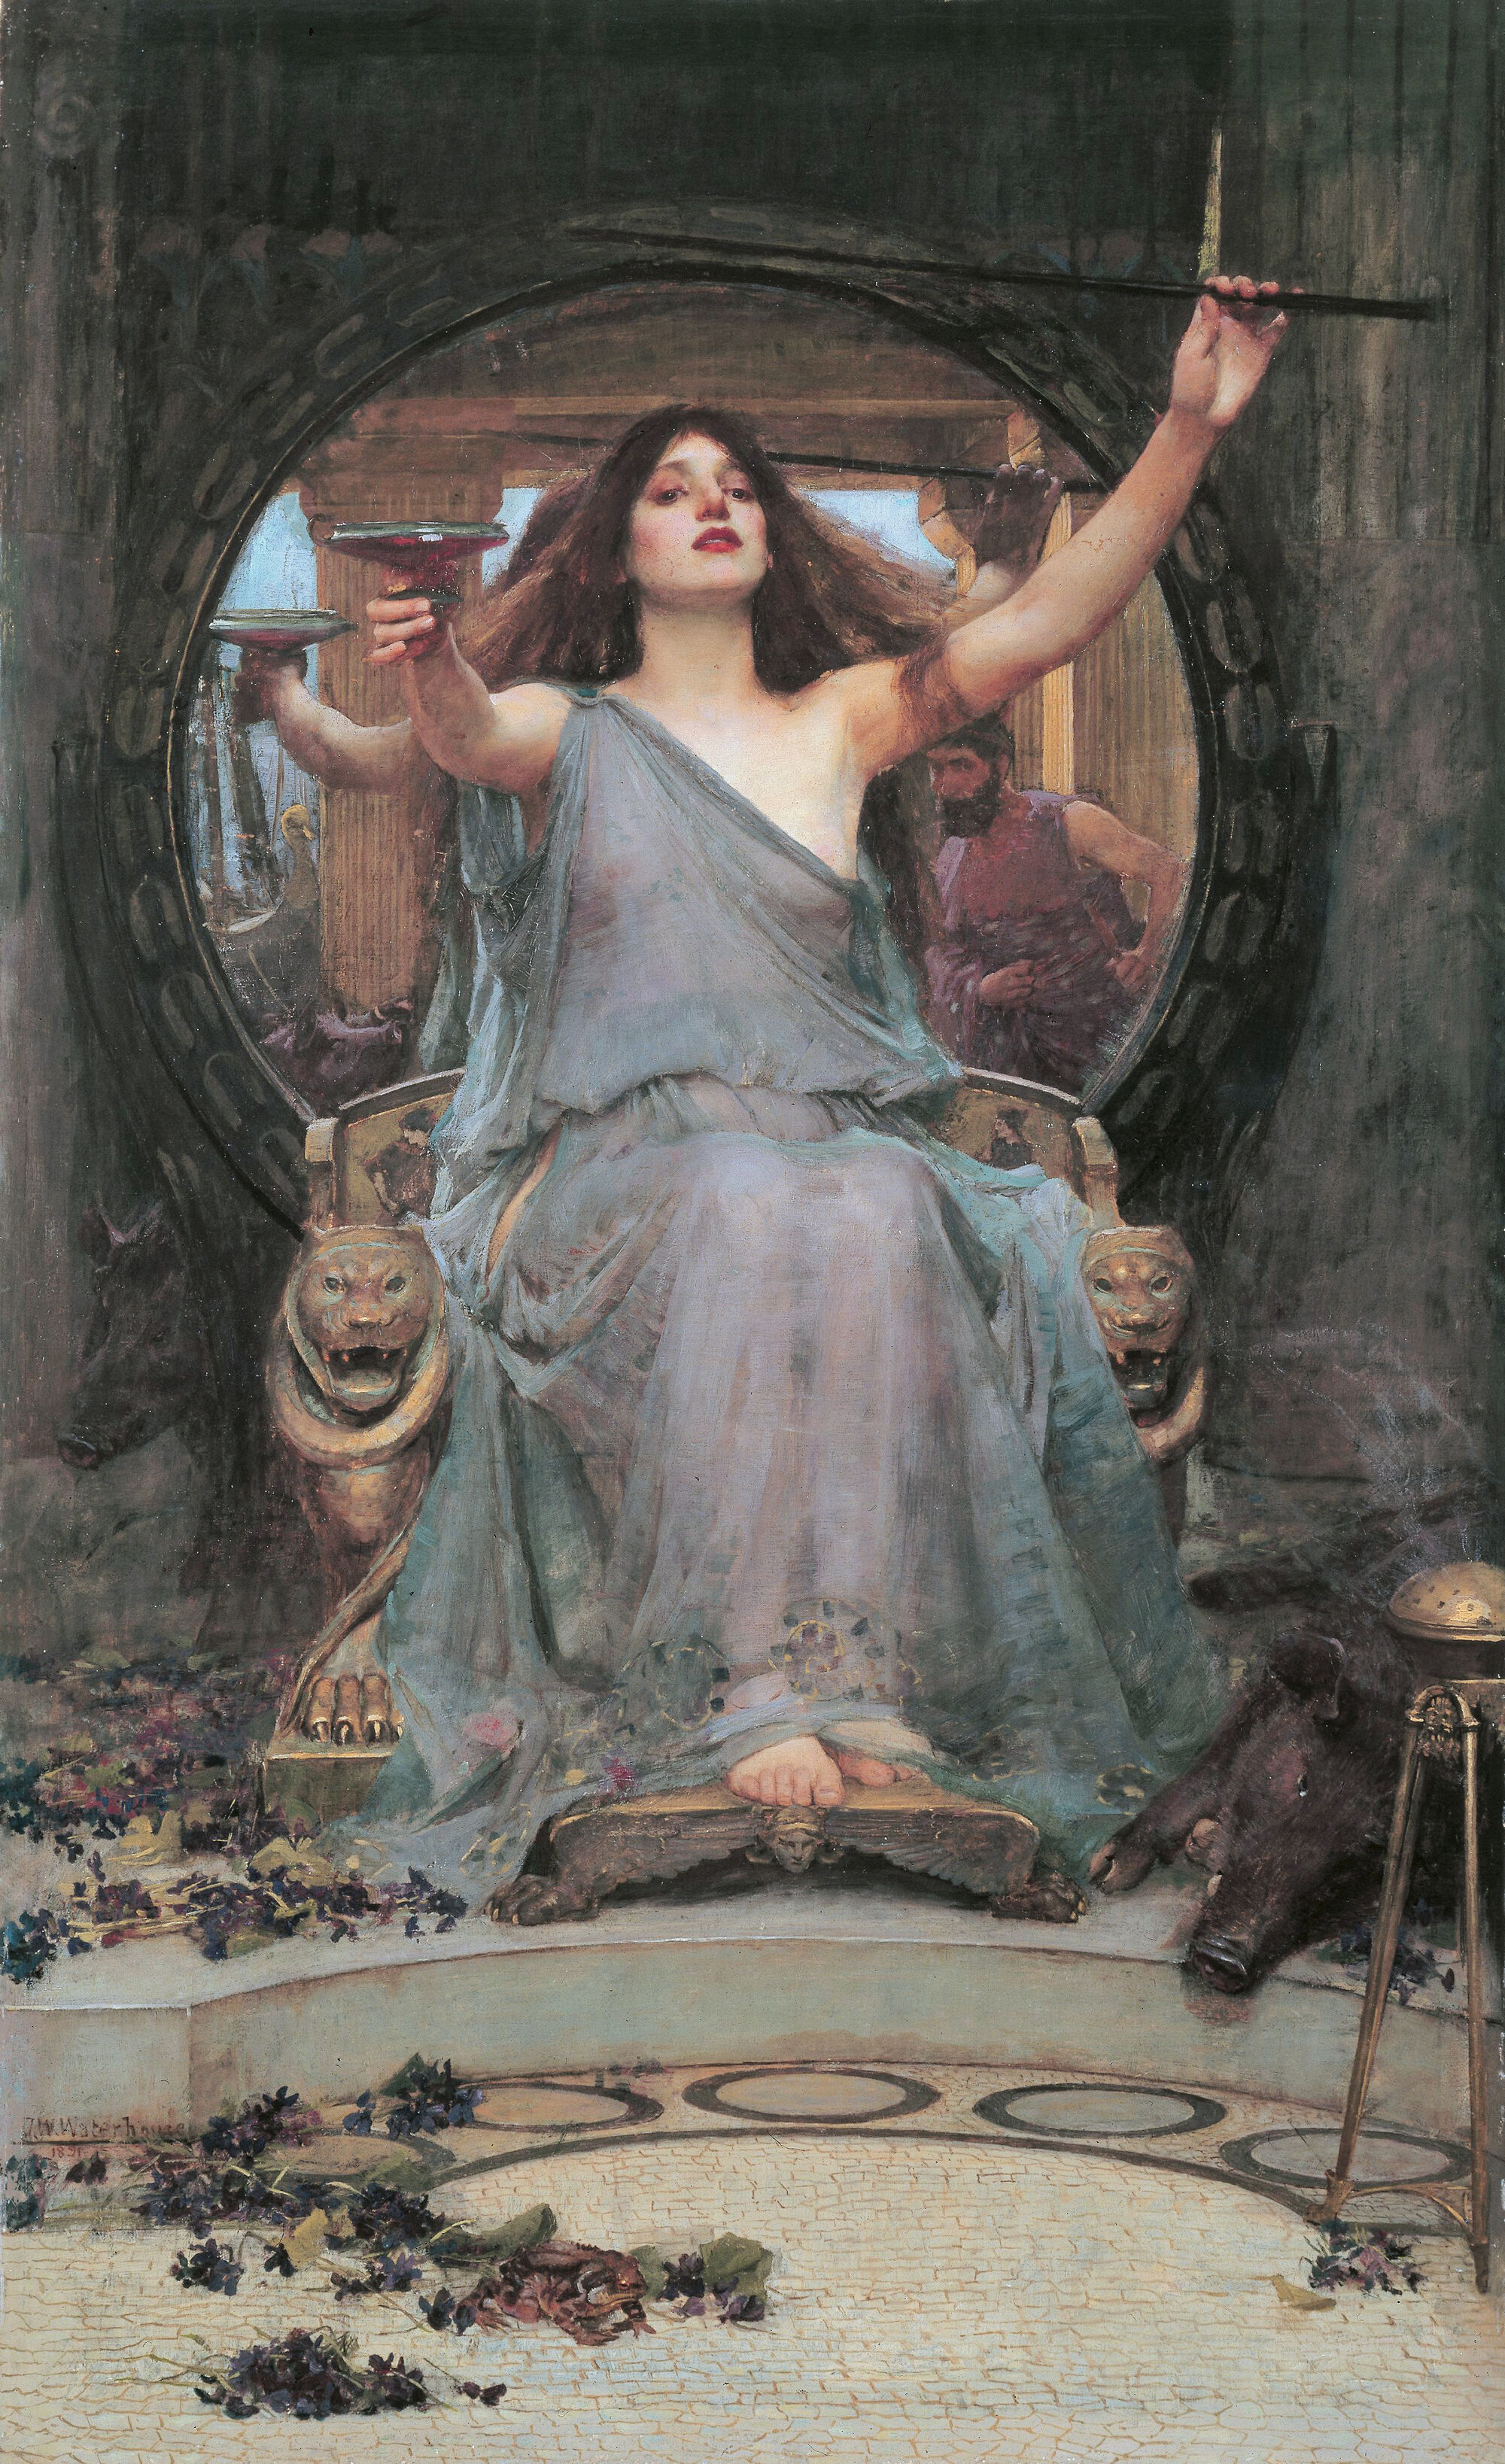 《circe offering the cup to ulysses》，作者约翰·威廉·沃特豪斯